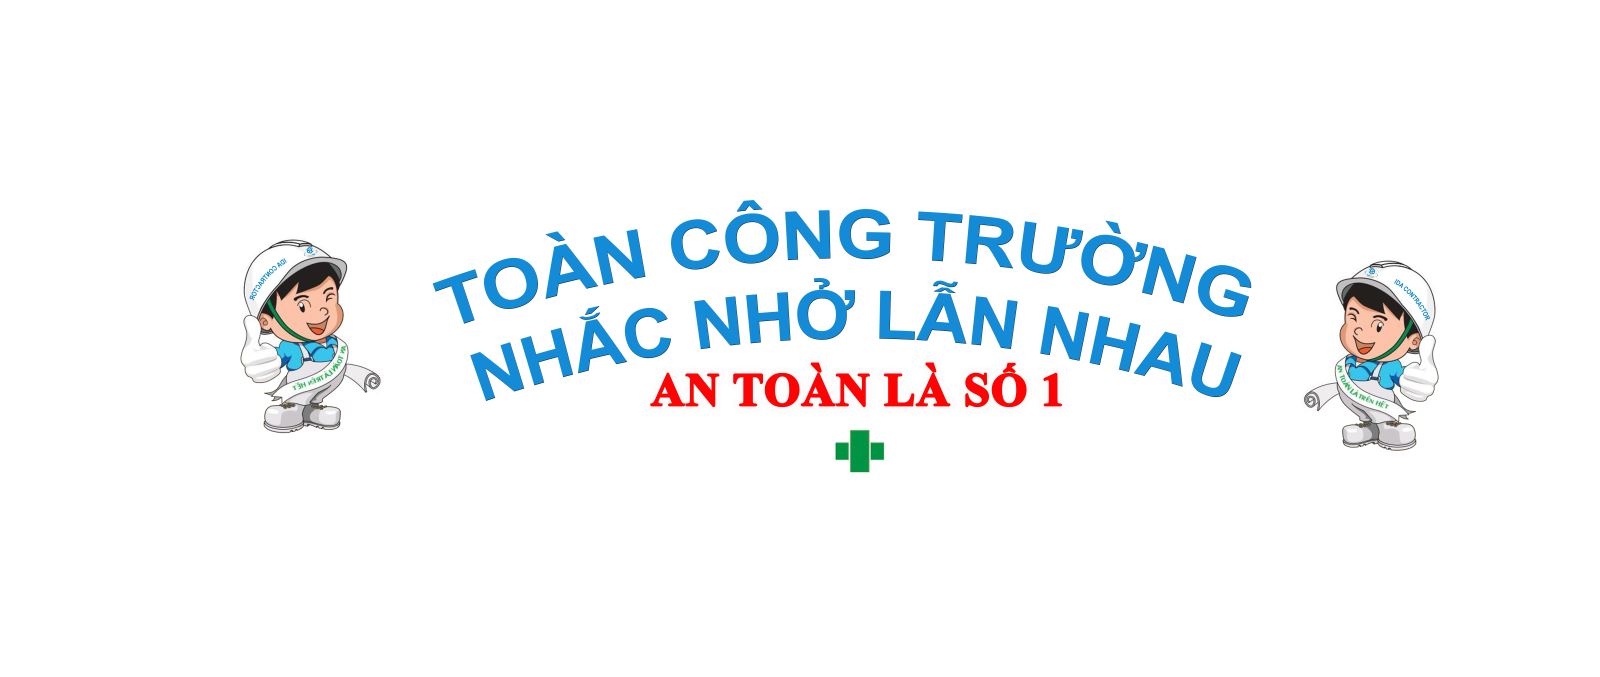 Anh an toan